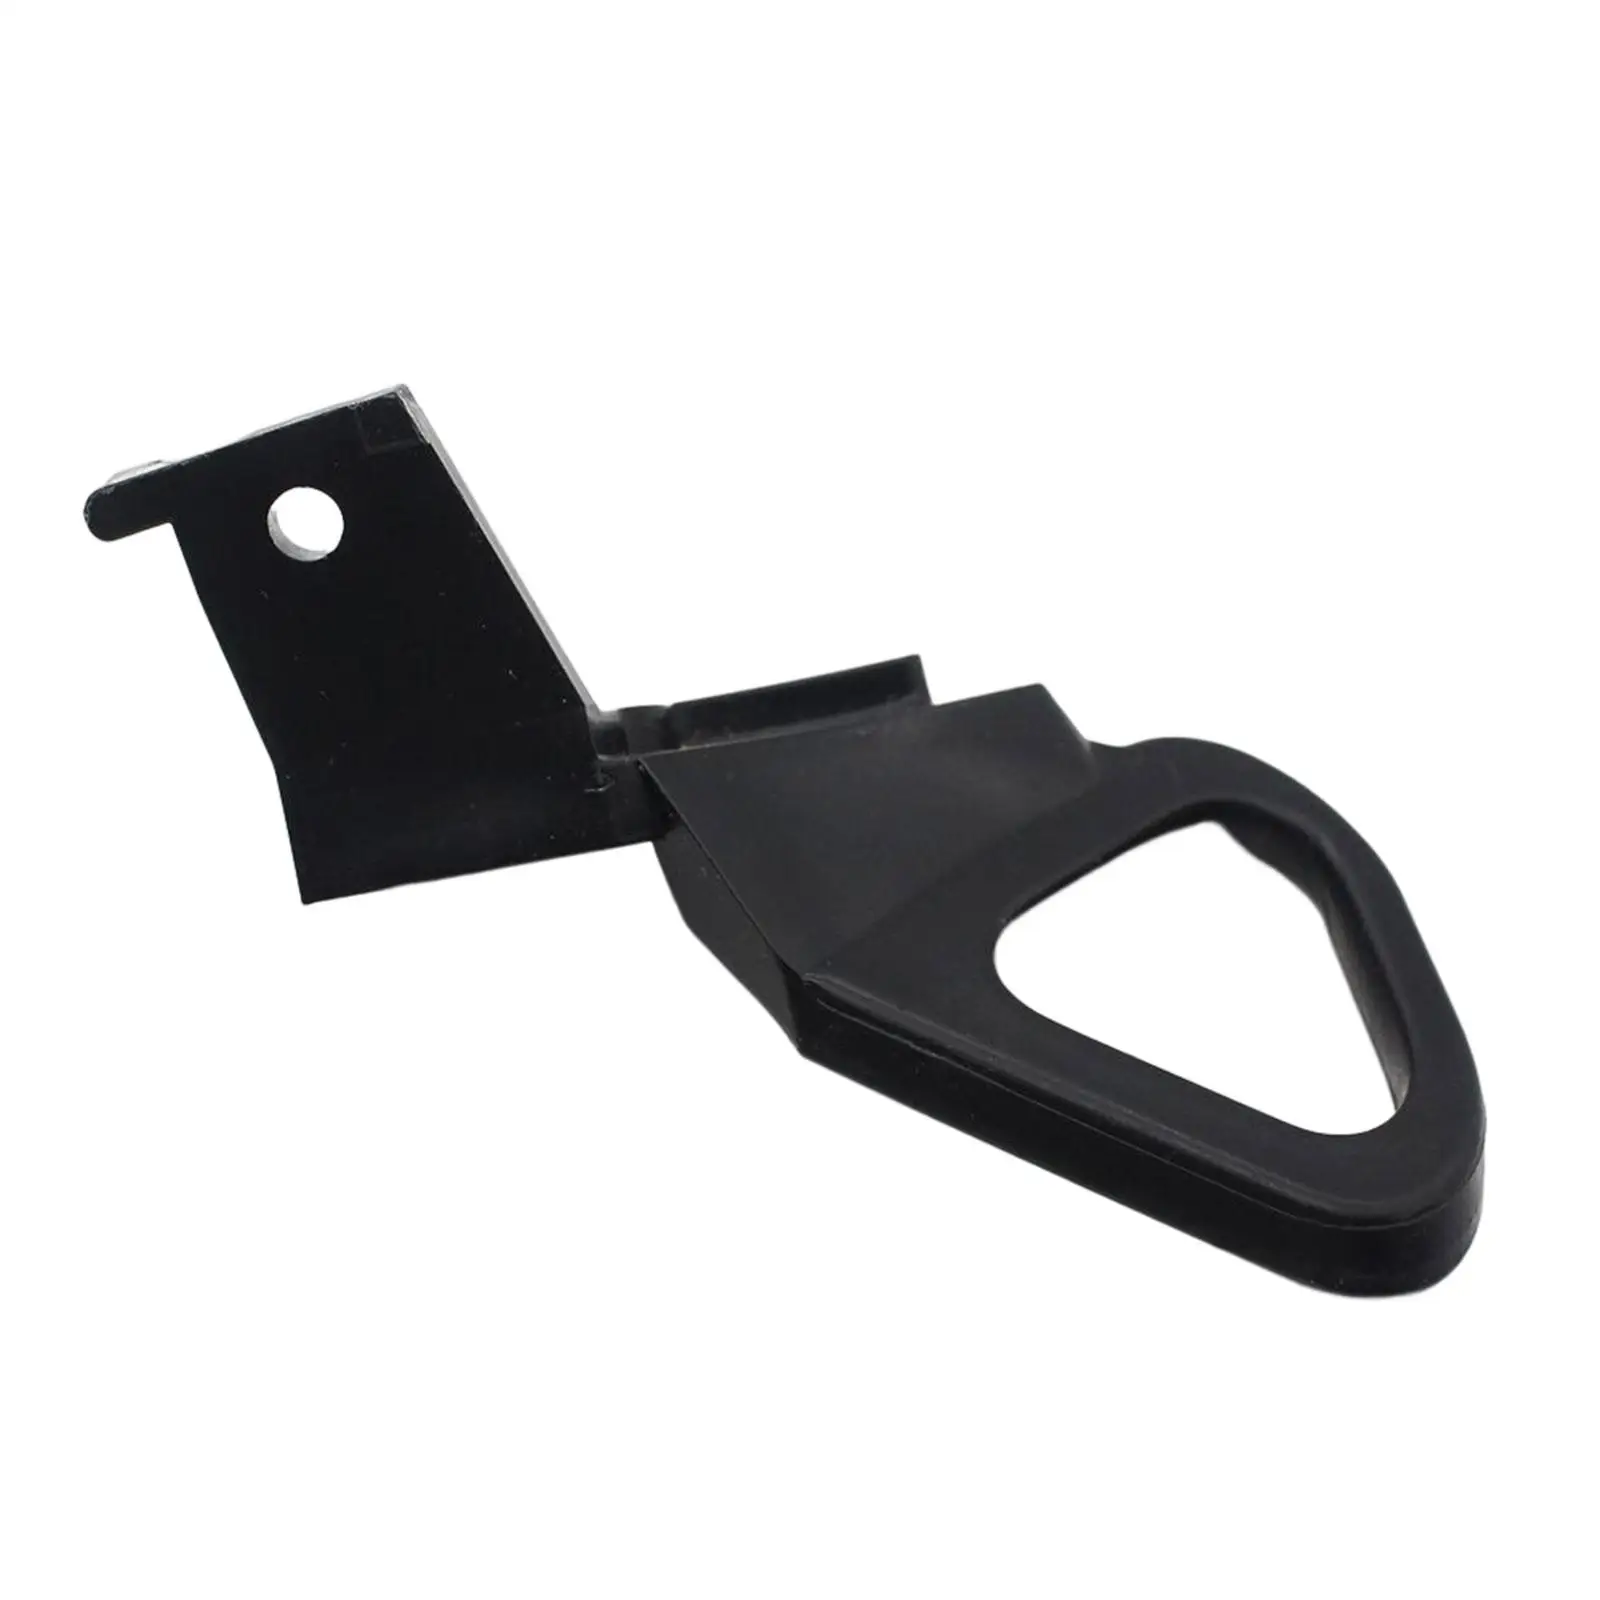 Oil Cup Fixed Bracket Cover Aluminum Alloy Oil Cup Bracket Assembly Easy to